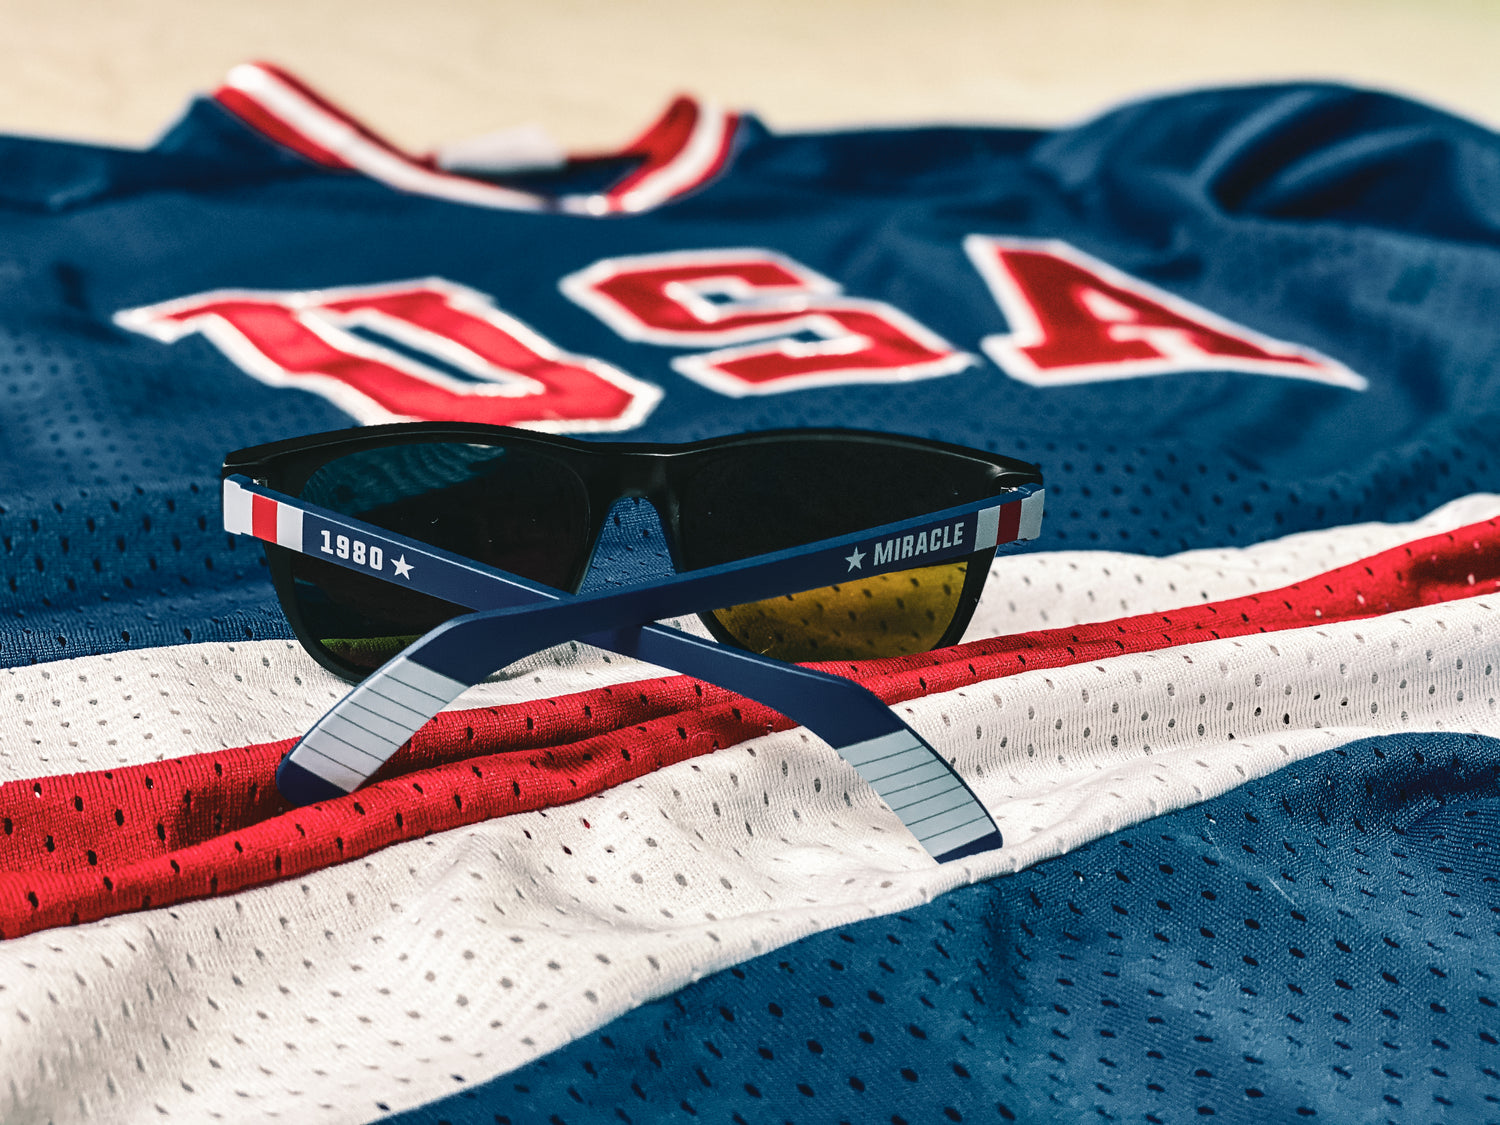 New Blade Shades Models Now Available!